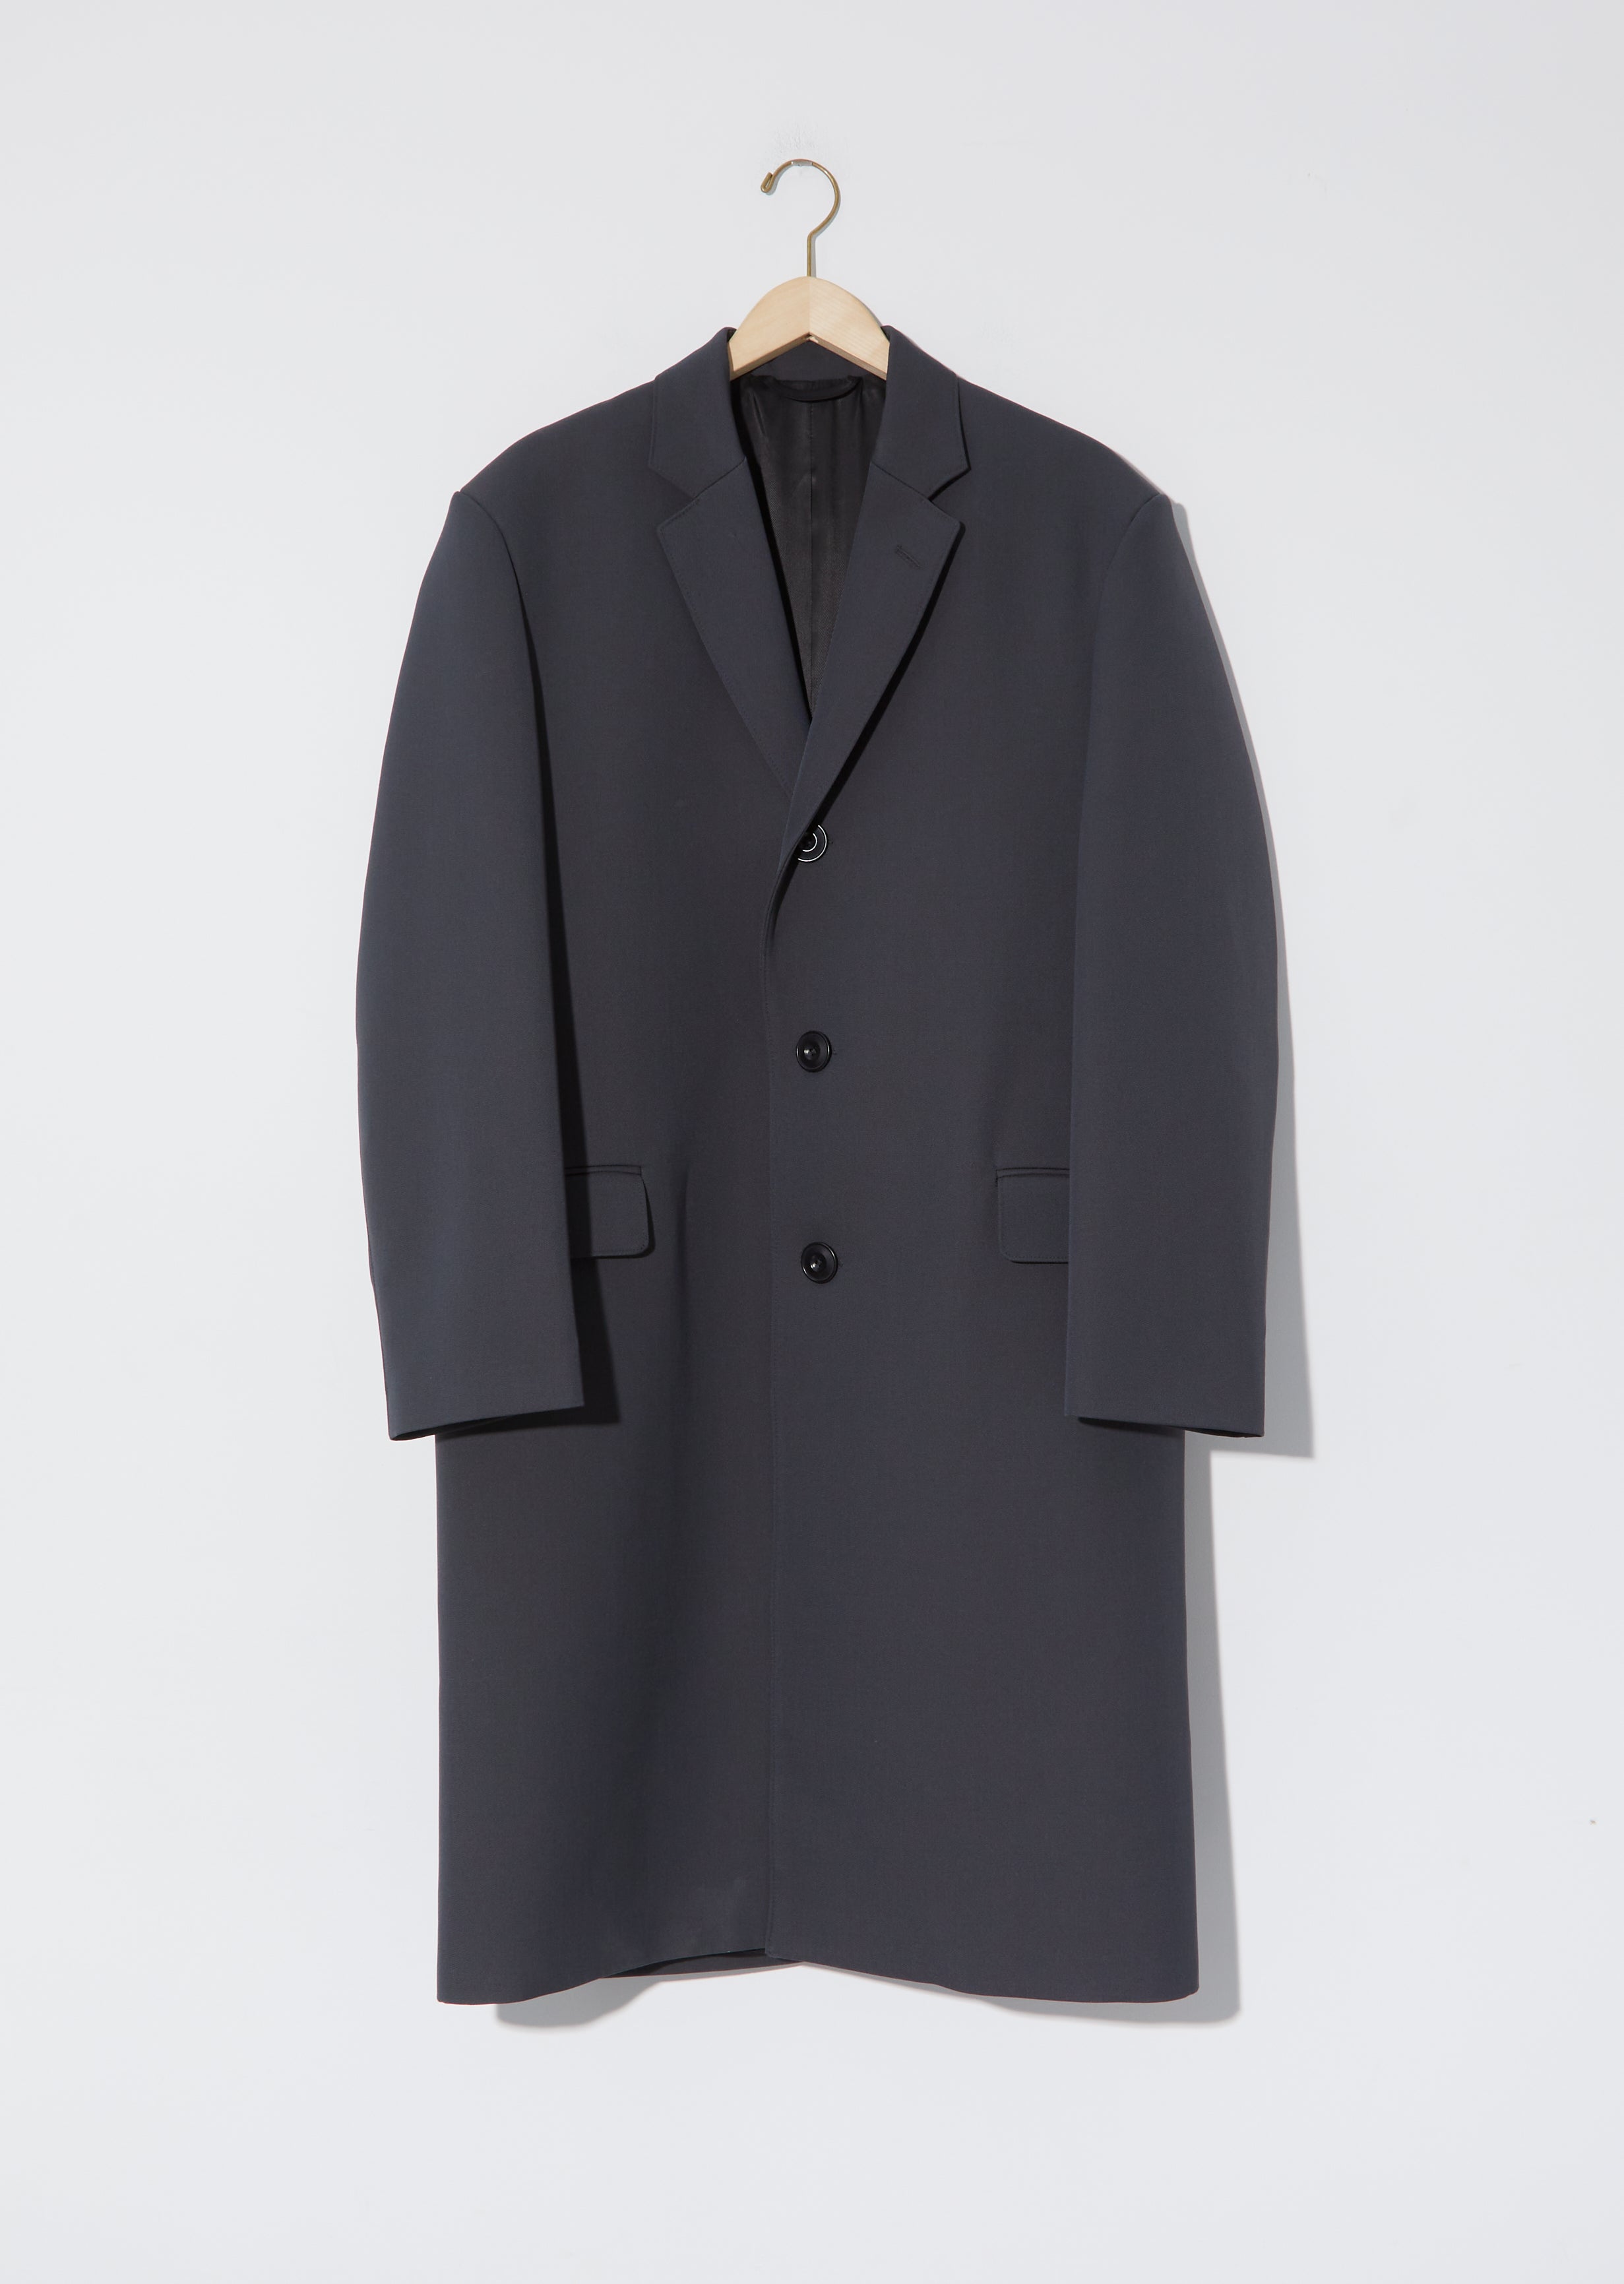 LEMAIRE SUIT COAT XS 20AW - アウター